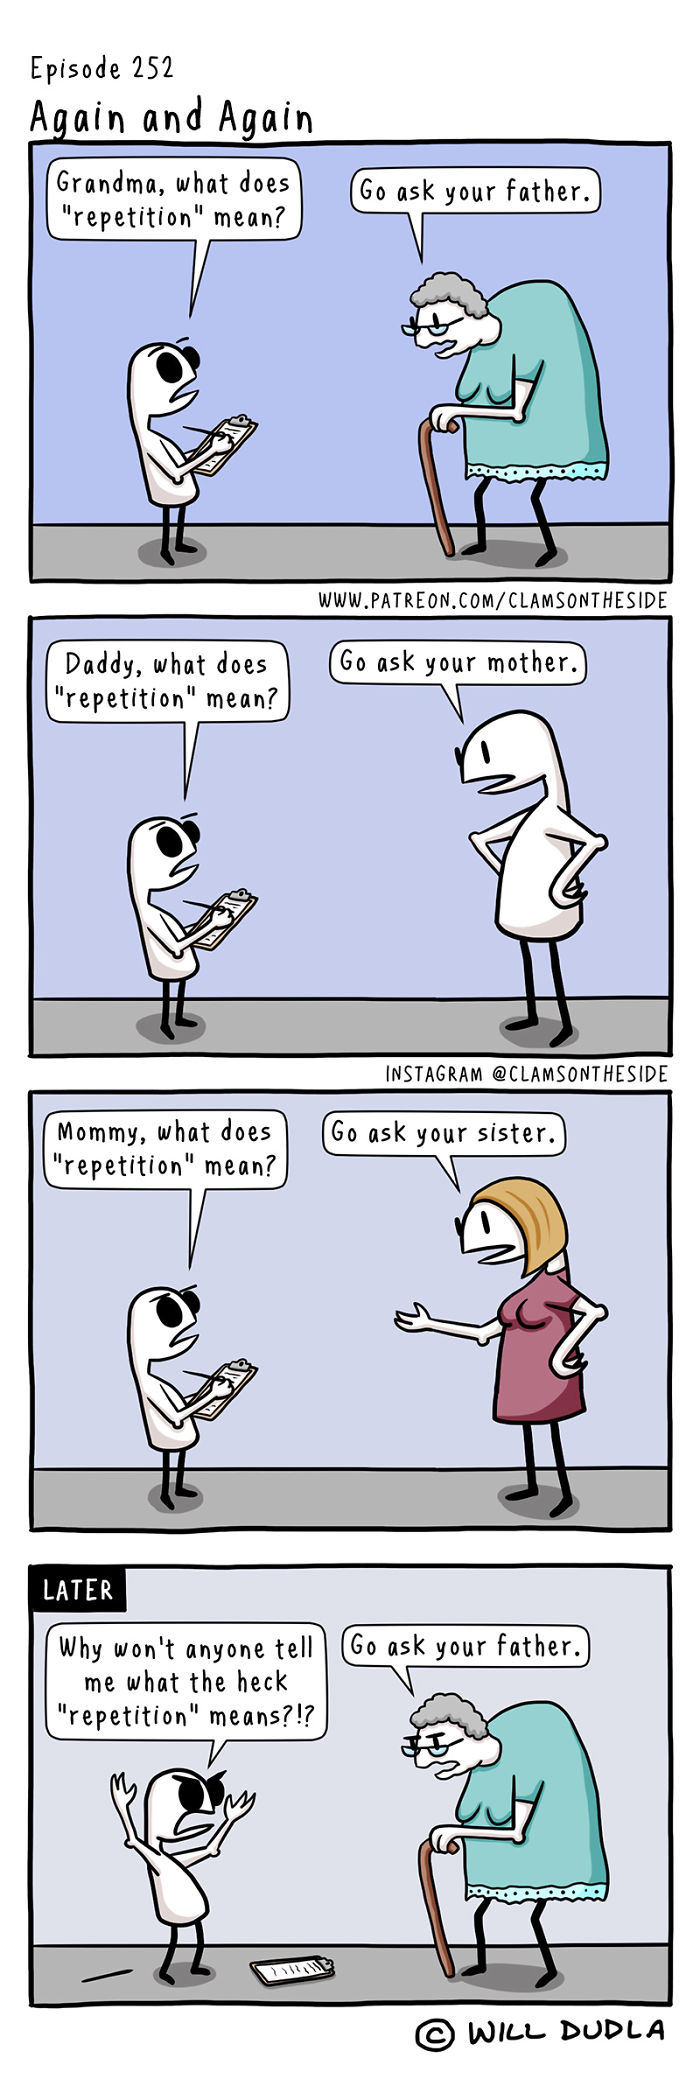 35 Absurdly Silly Comics To Help You Get Through Your Day.